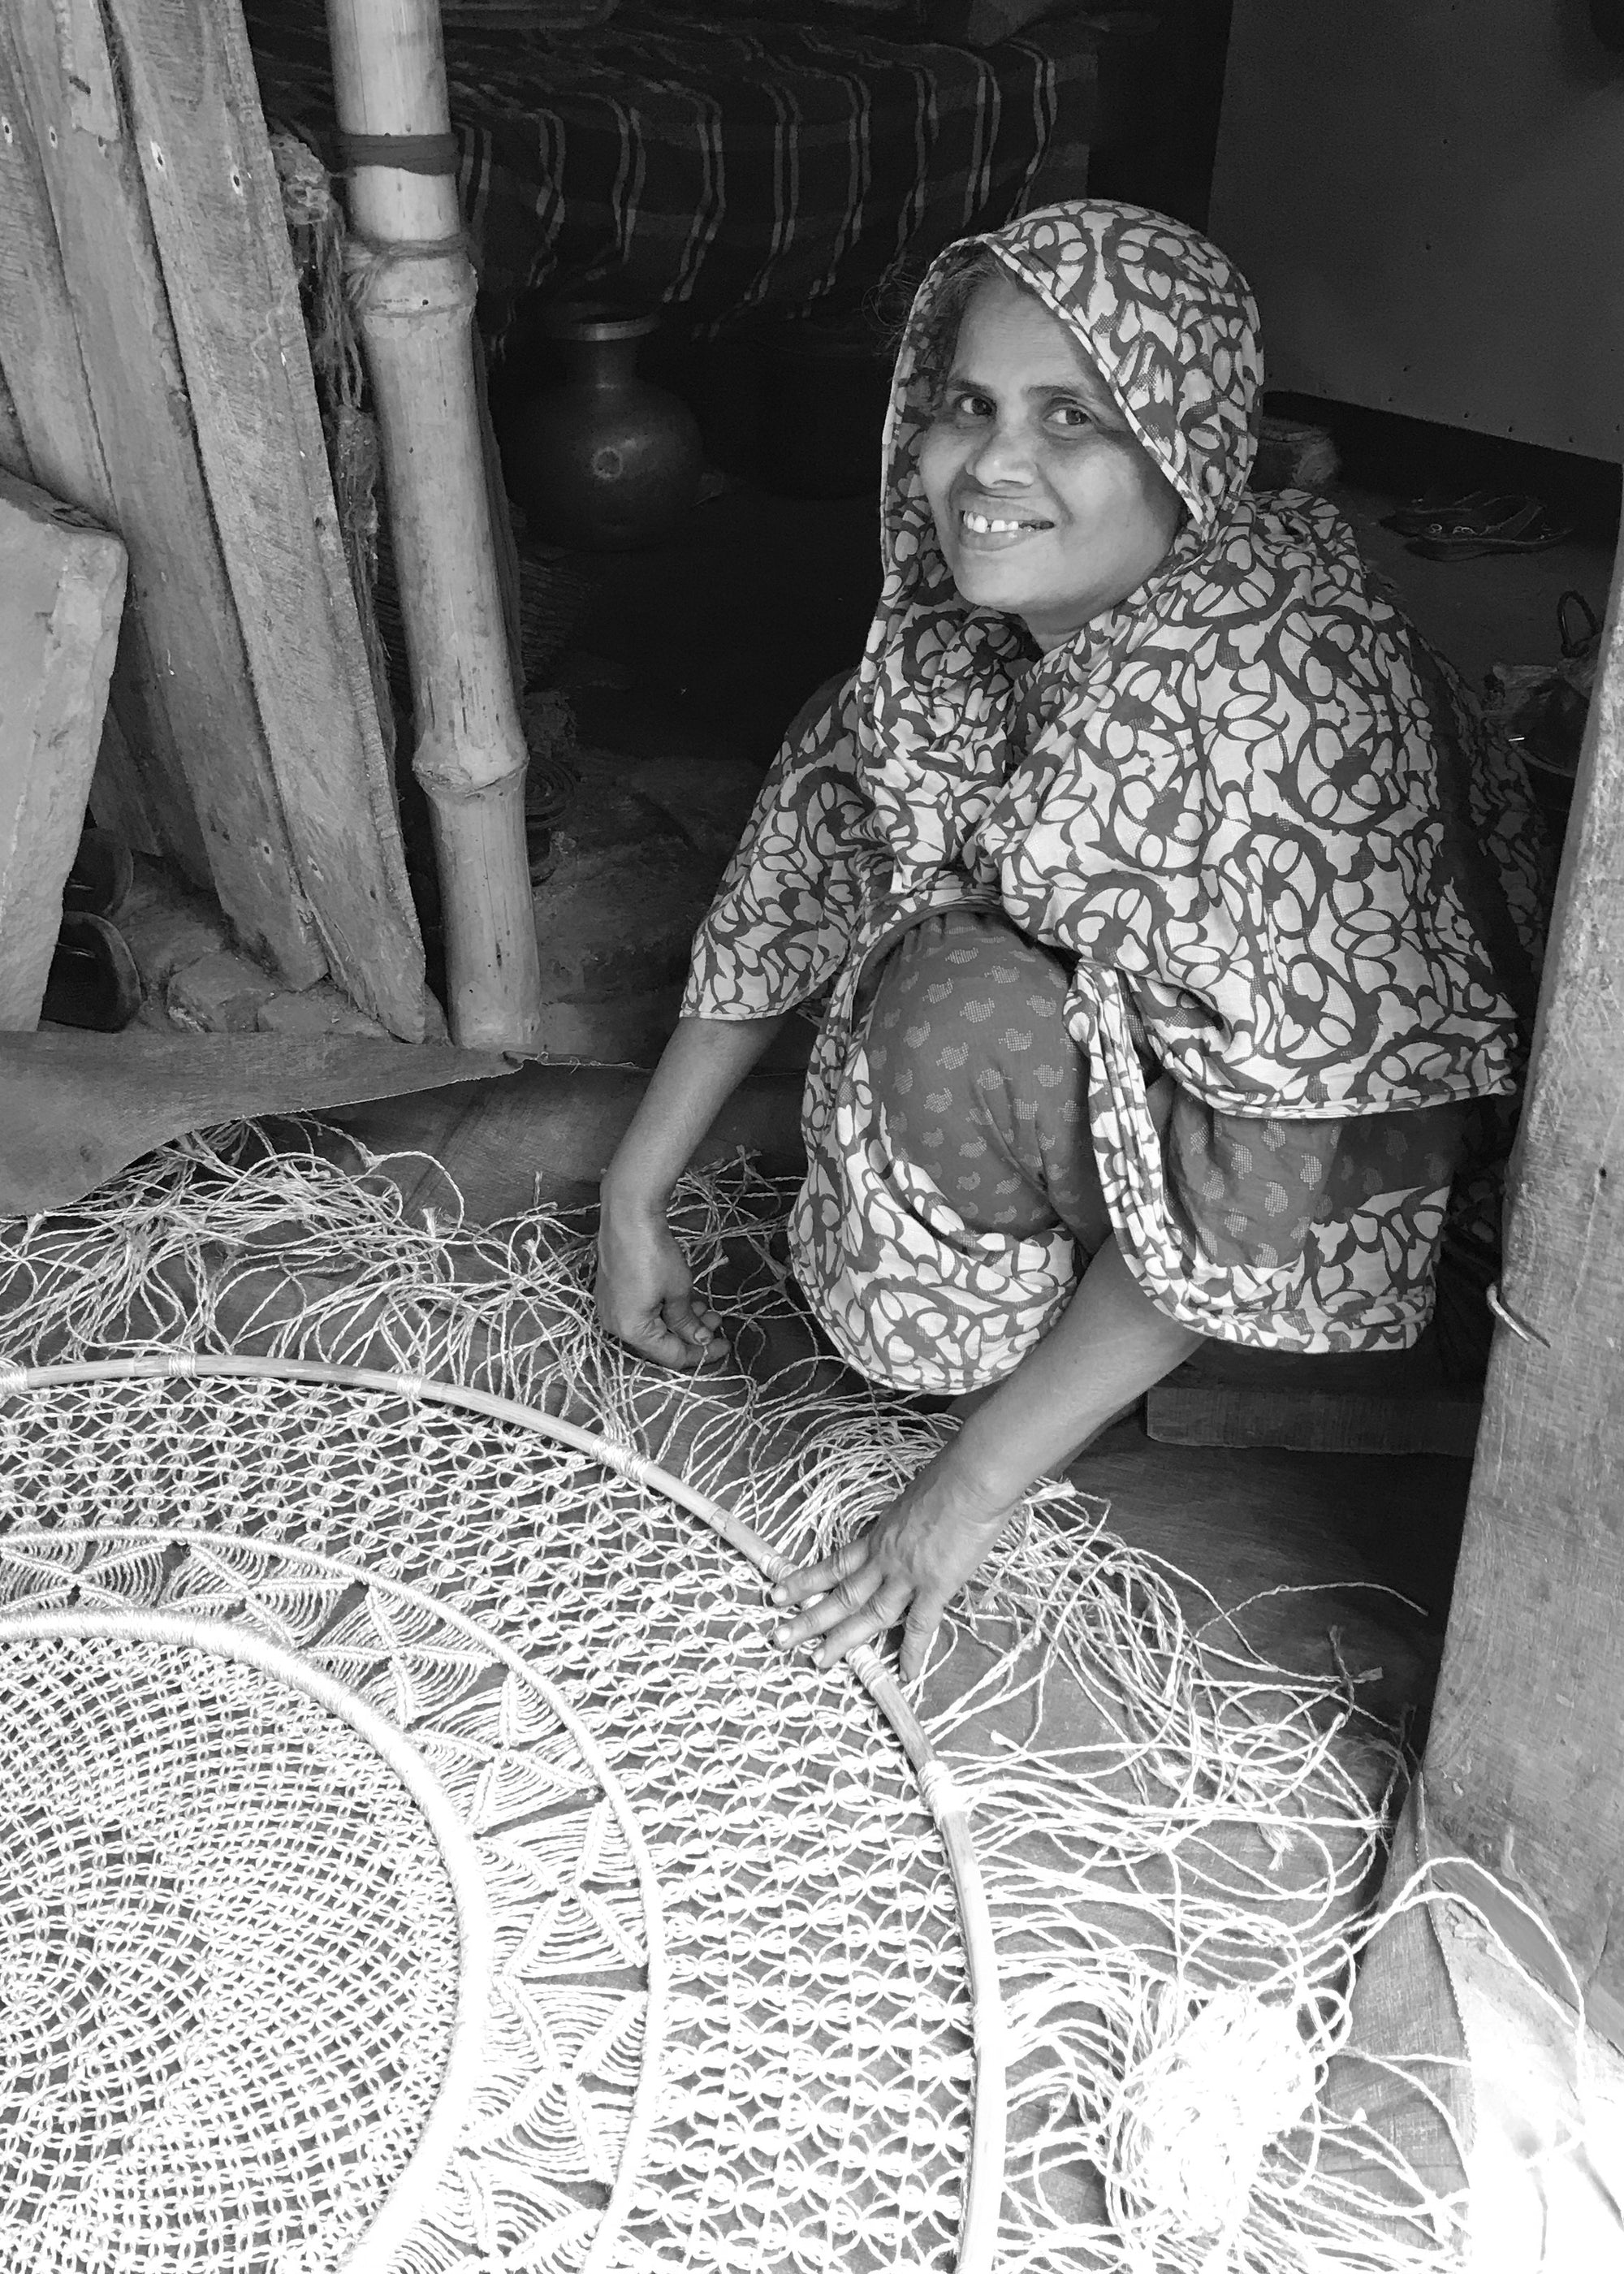 One of our Fair Trade artisans working on a handmade woven wall hanging